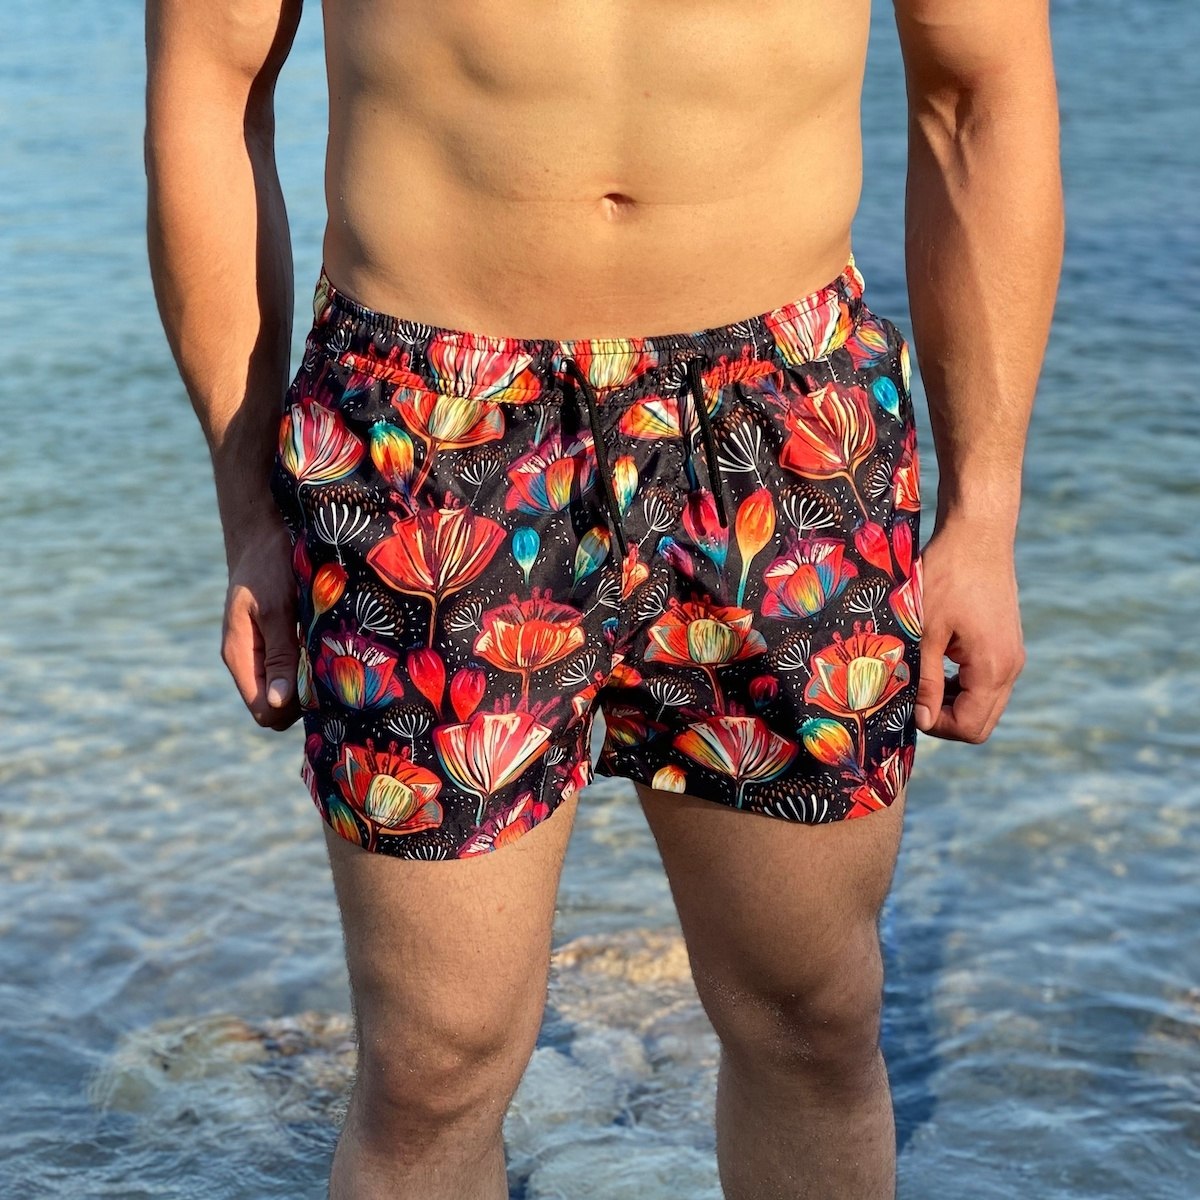 Men's Swimming Short With Floral Patterns - 1